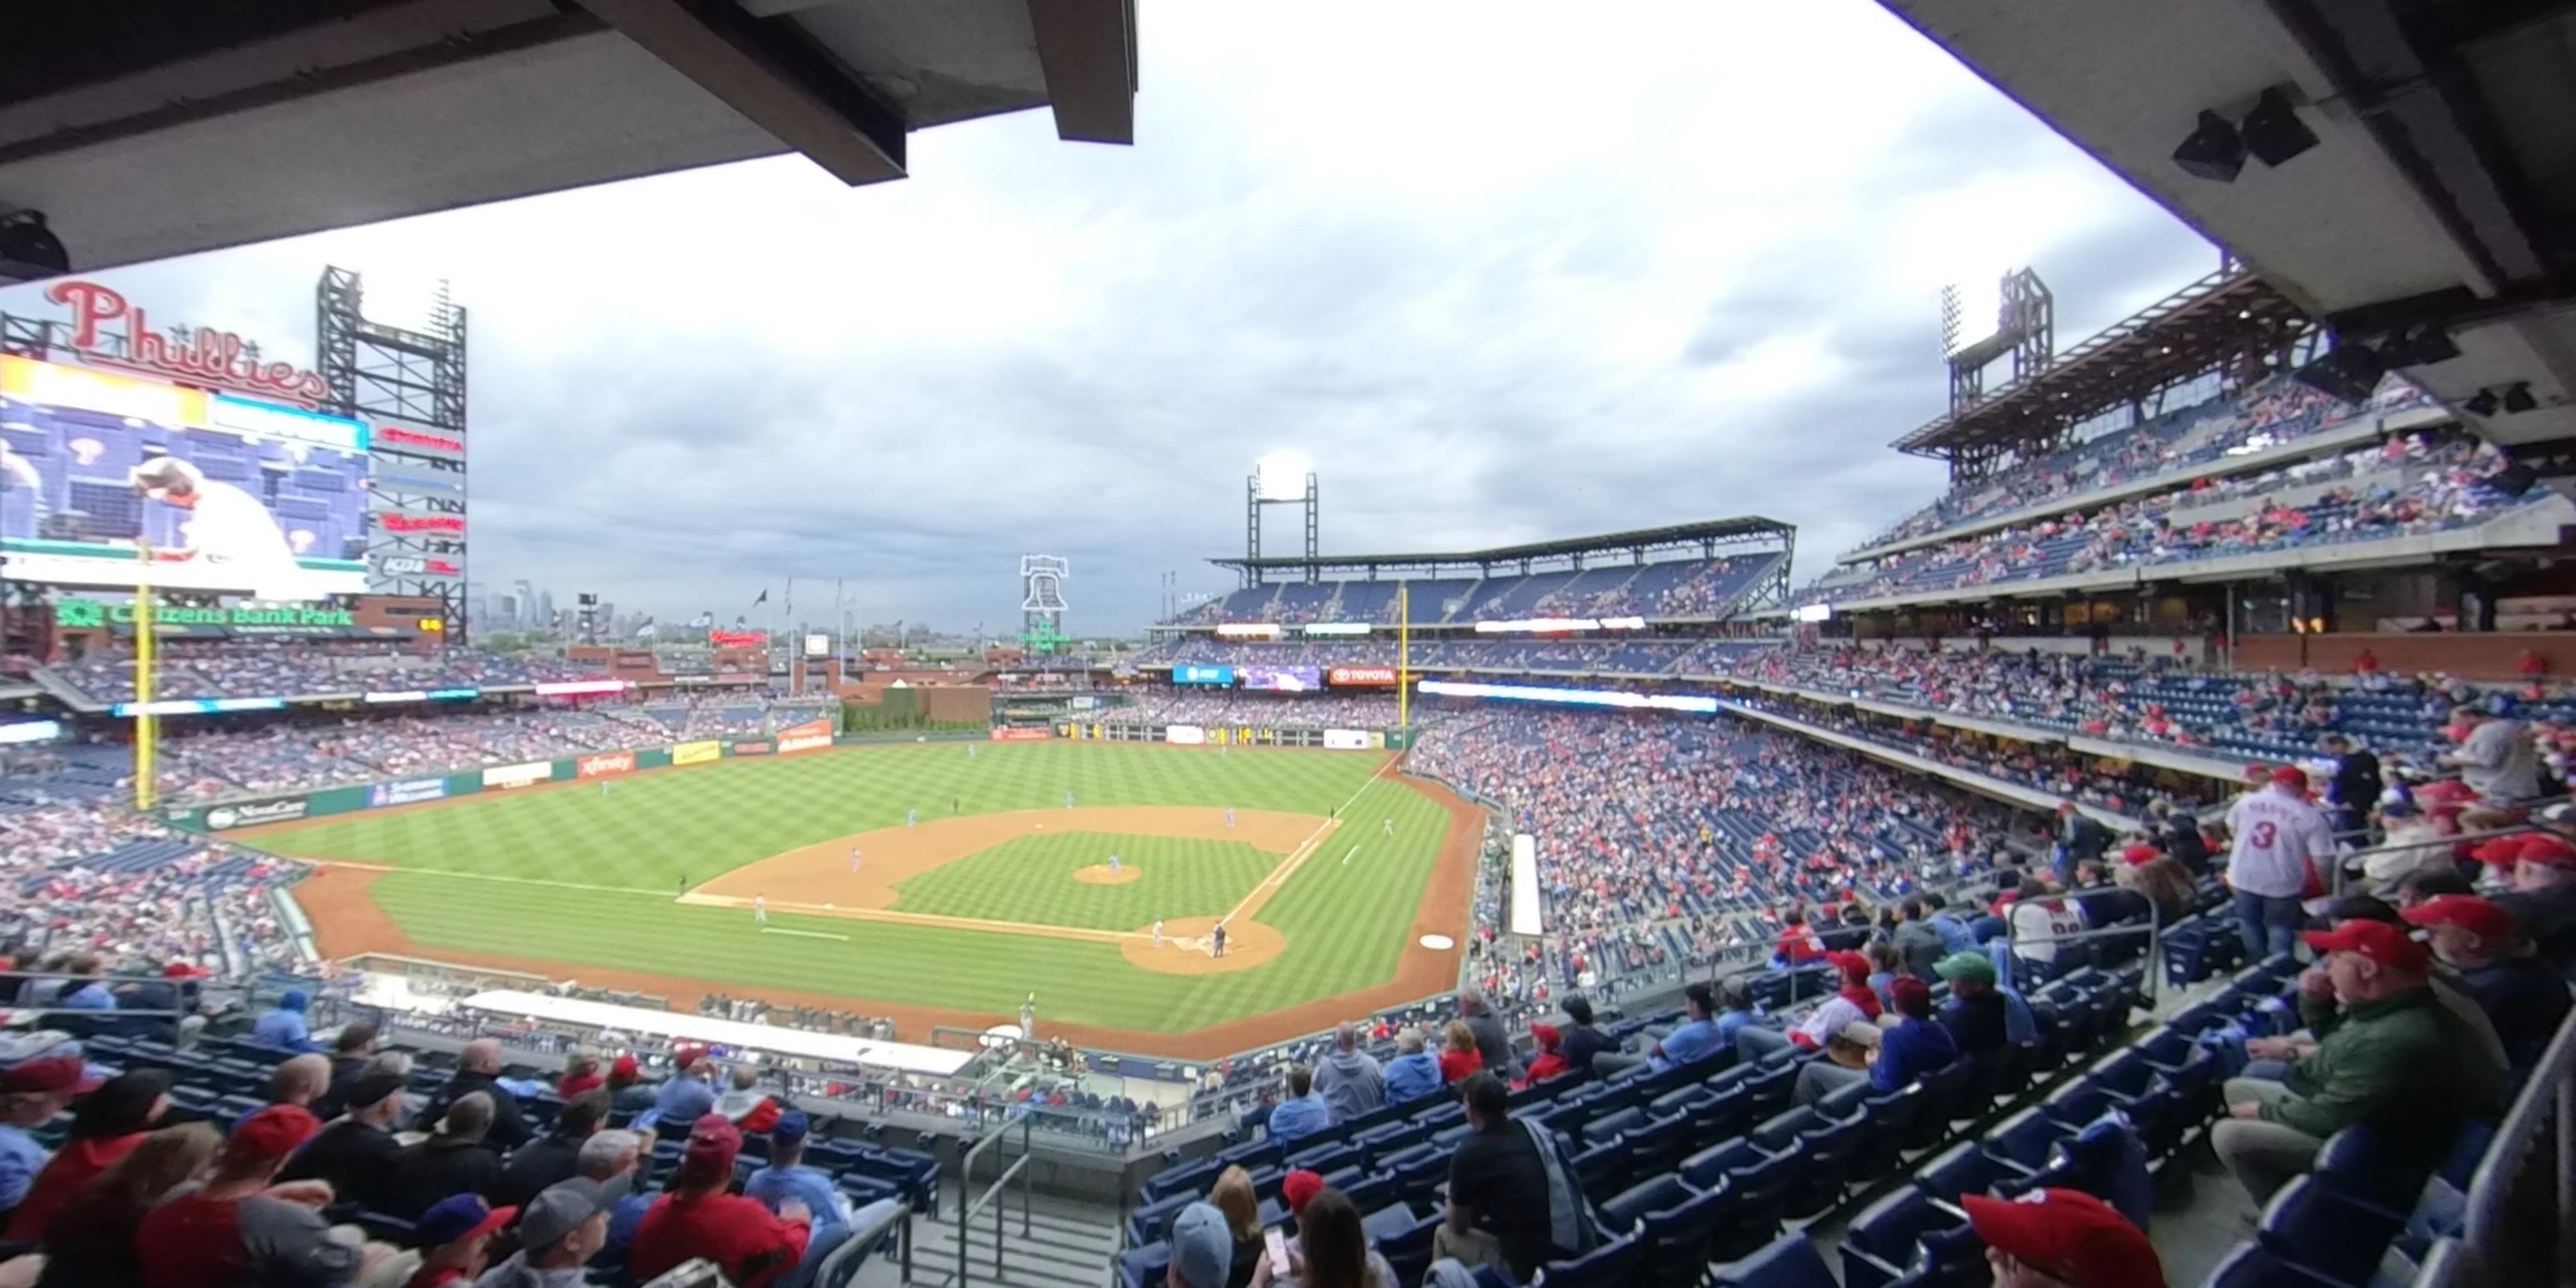 section 224 panoramic seat view  for baseball - citizens bank park